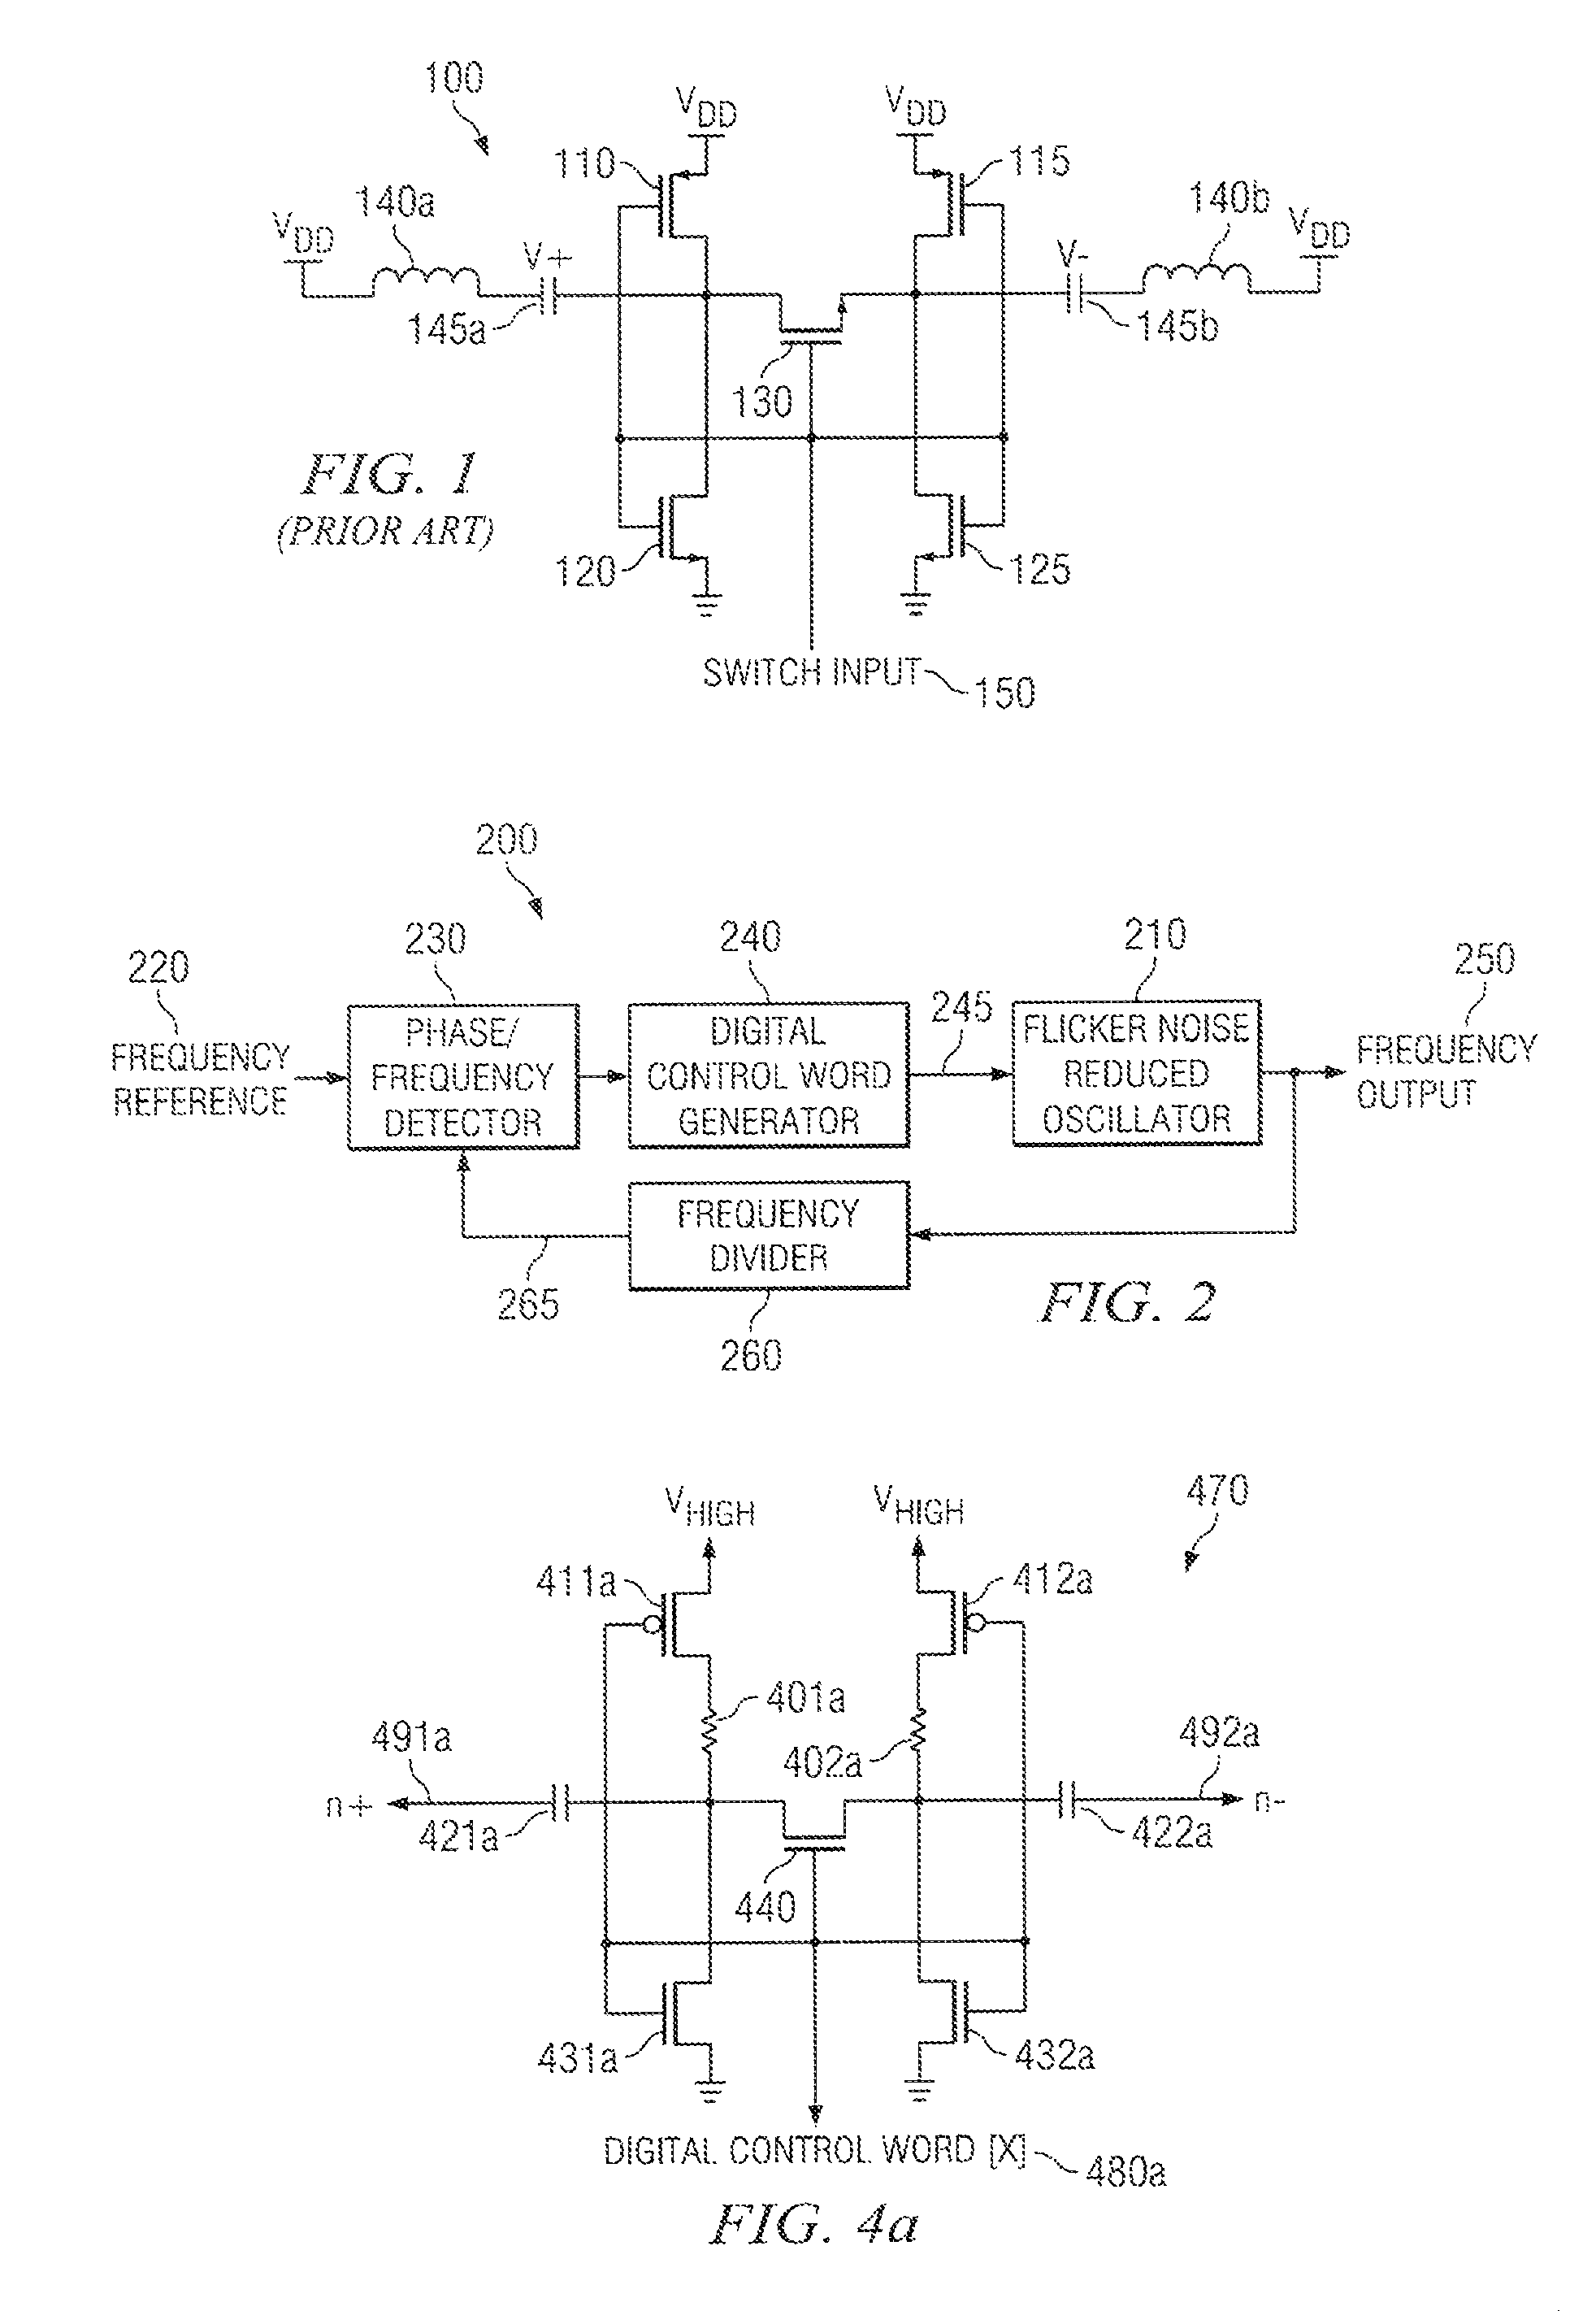 Systems and methods for reducing flicker noise in an oscillator